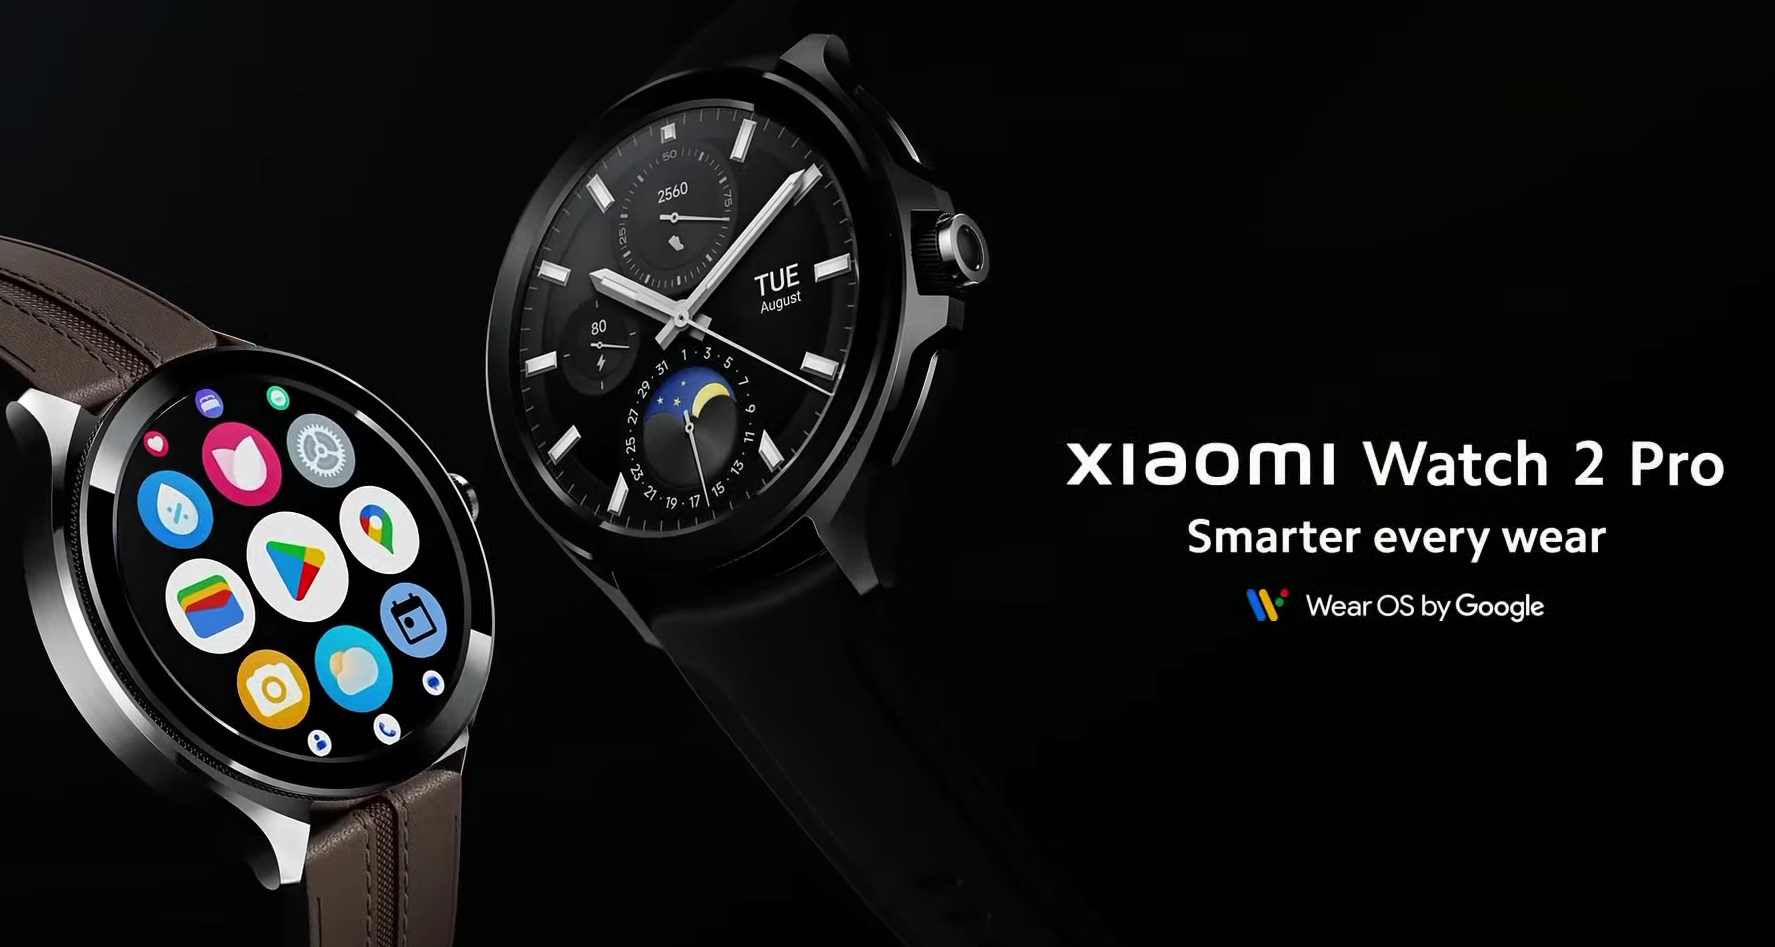 Style-minded Xiaomi Watch 2 Pro returns to WearOS